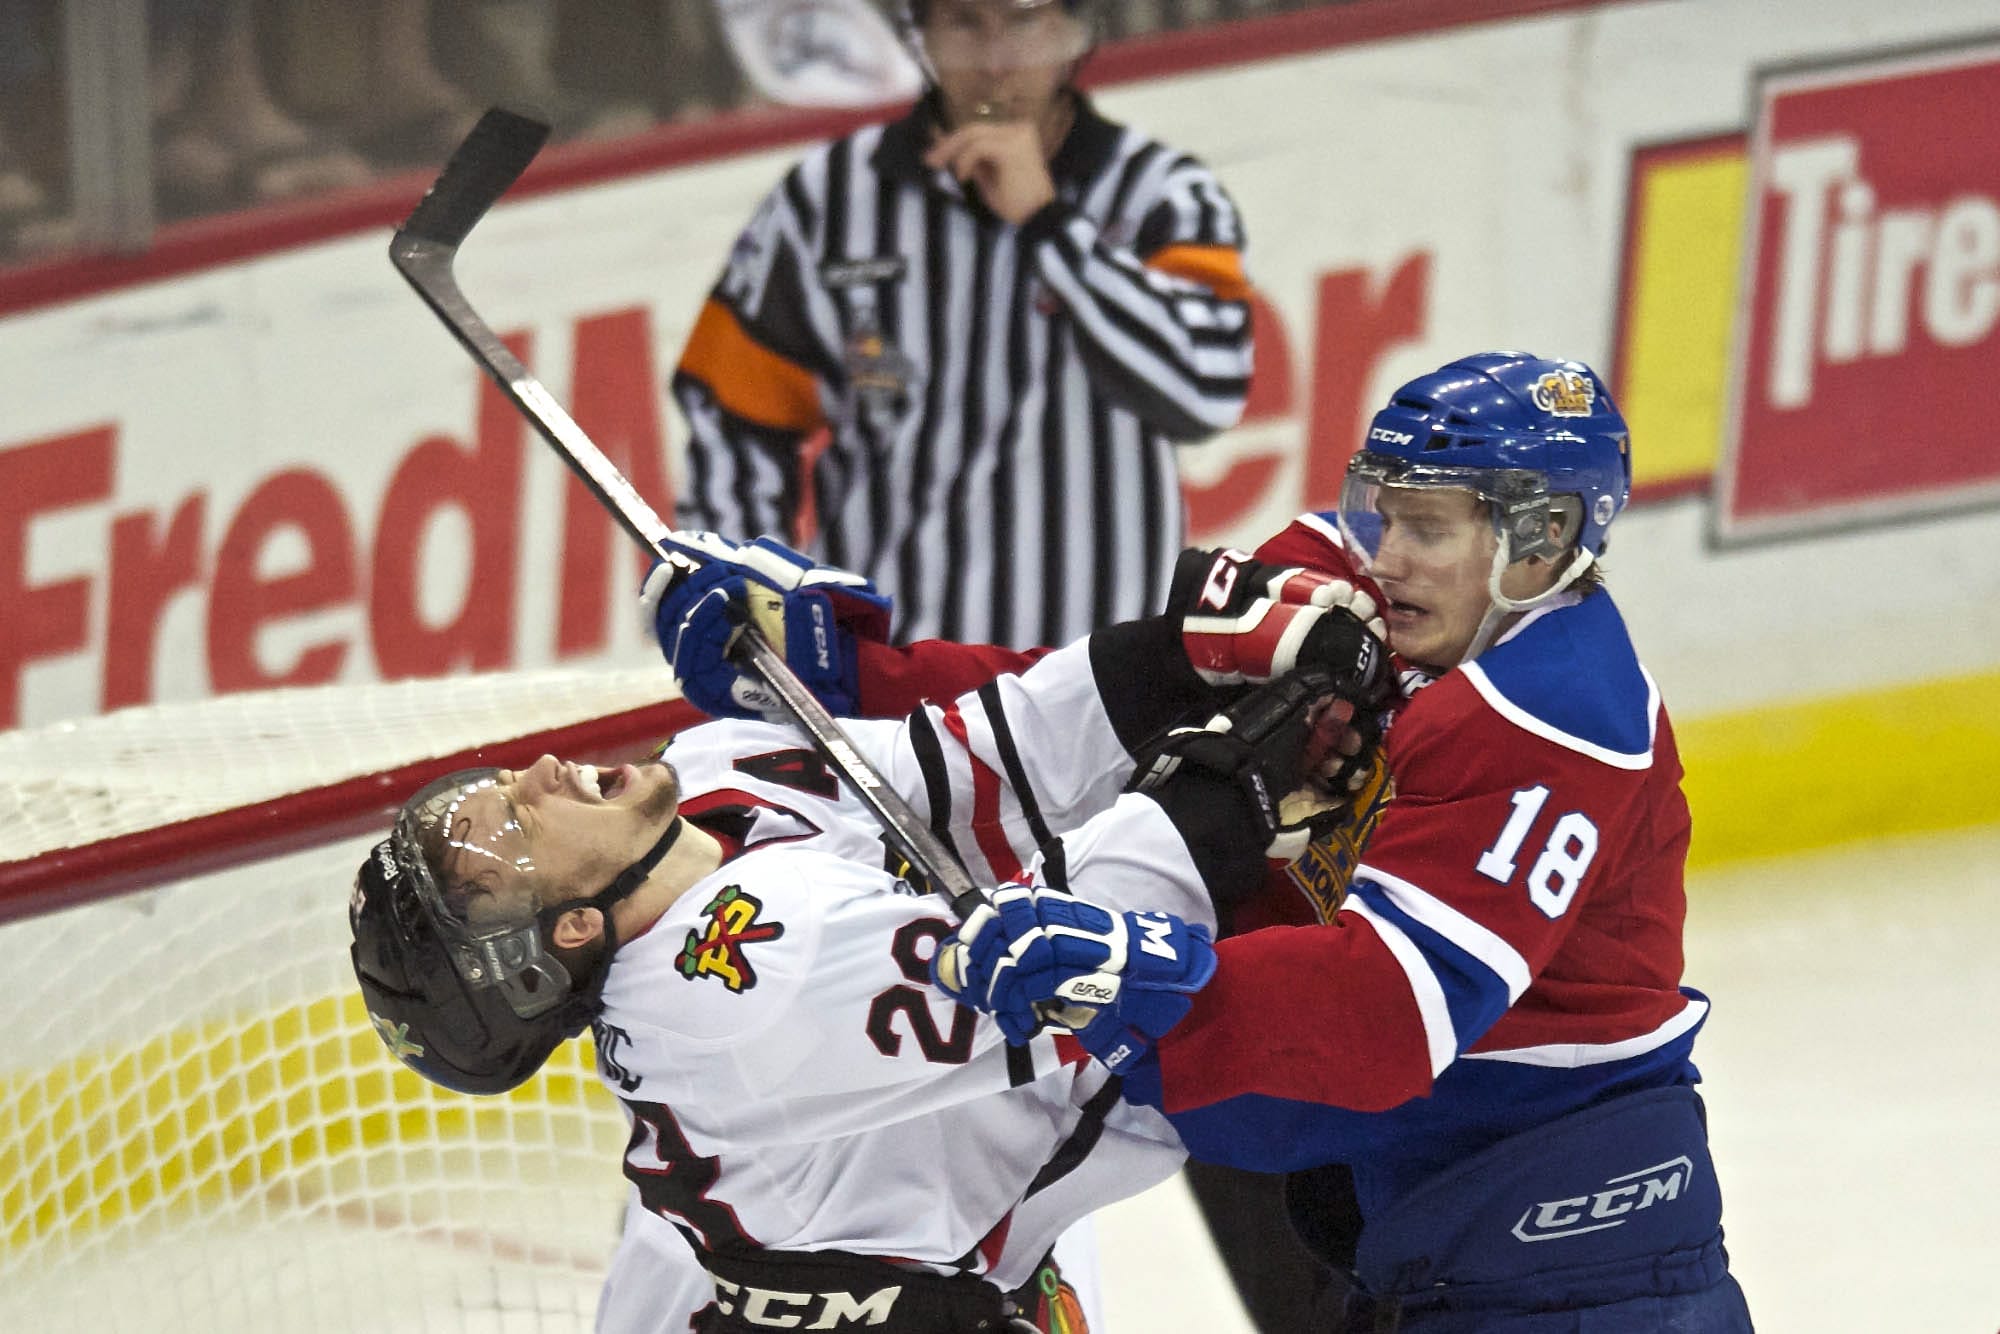 The Winterhawks' Brendan Leipsic takes a stick up high from the Oil Kings' Reid Petryk in the second period.